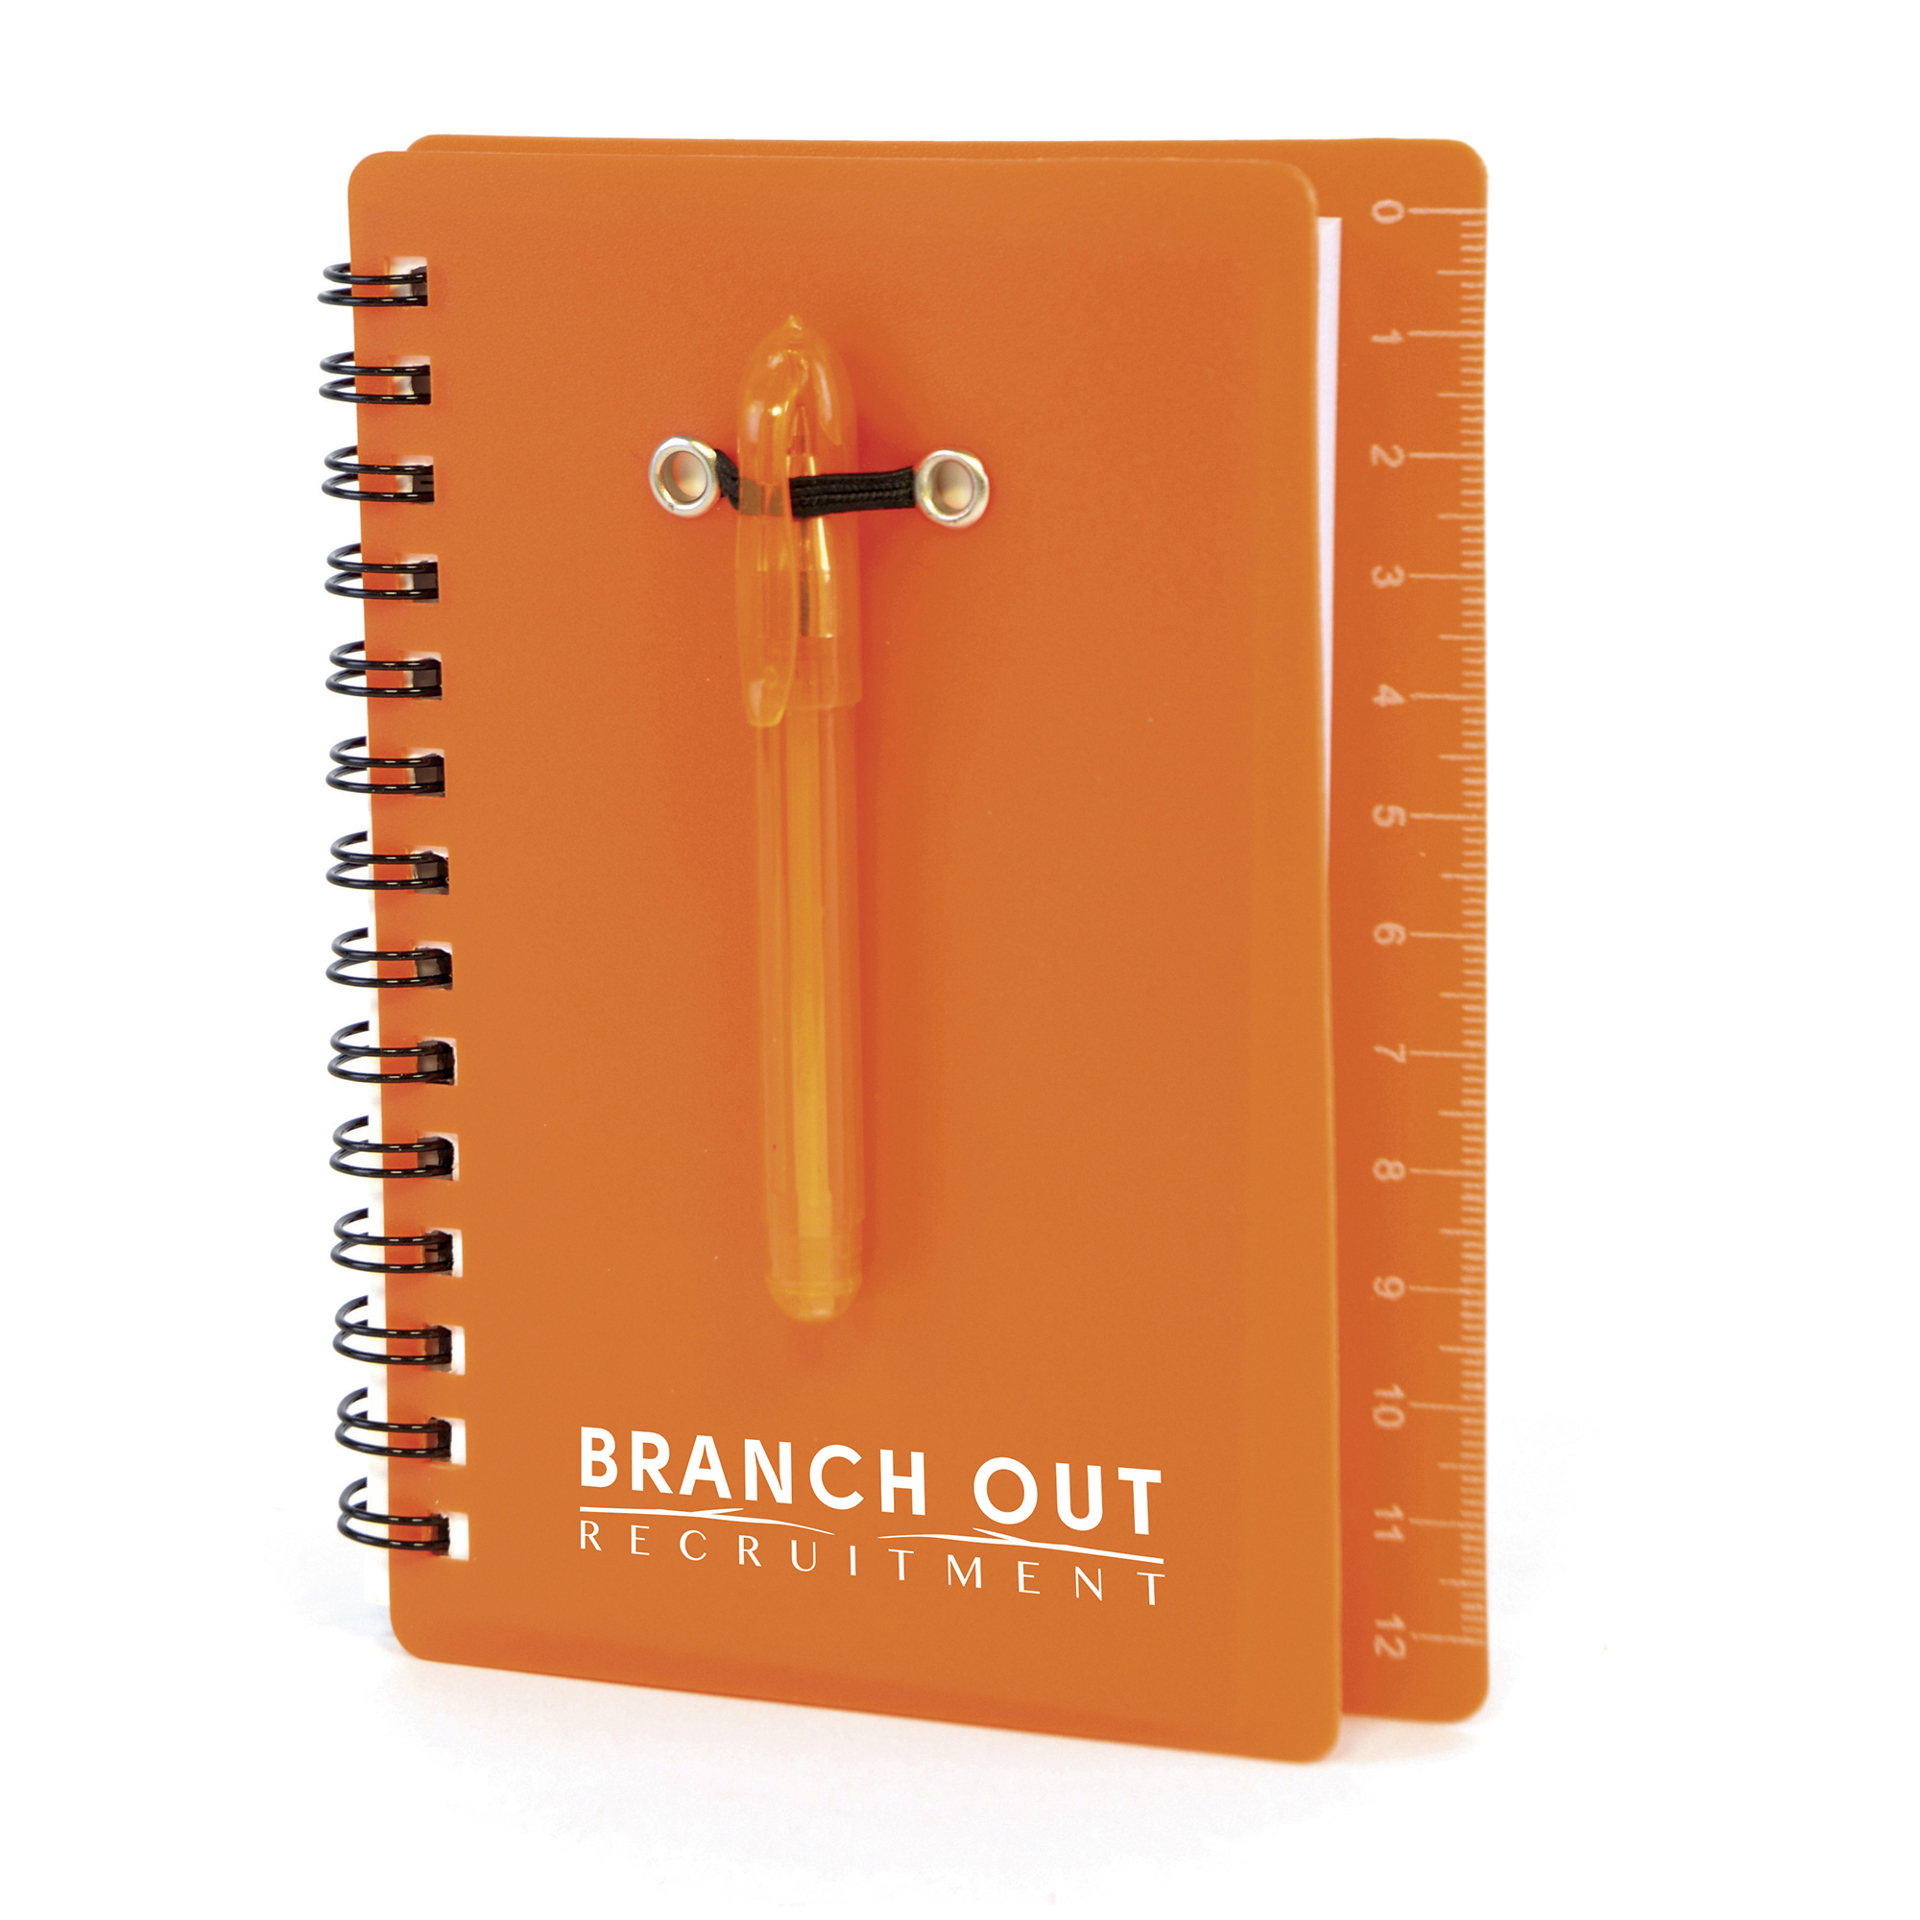 Spiral bound flexible orange plastic covered notebook with matching ball pen with back cover ruler